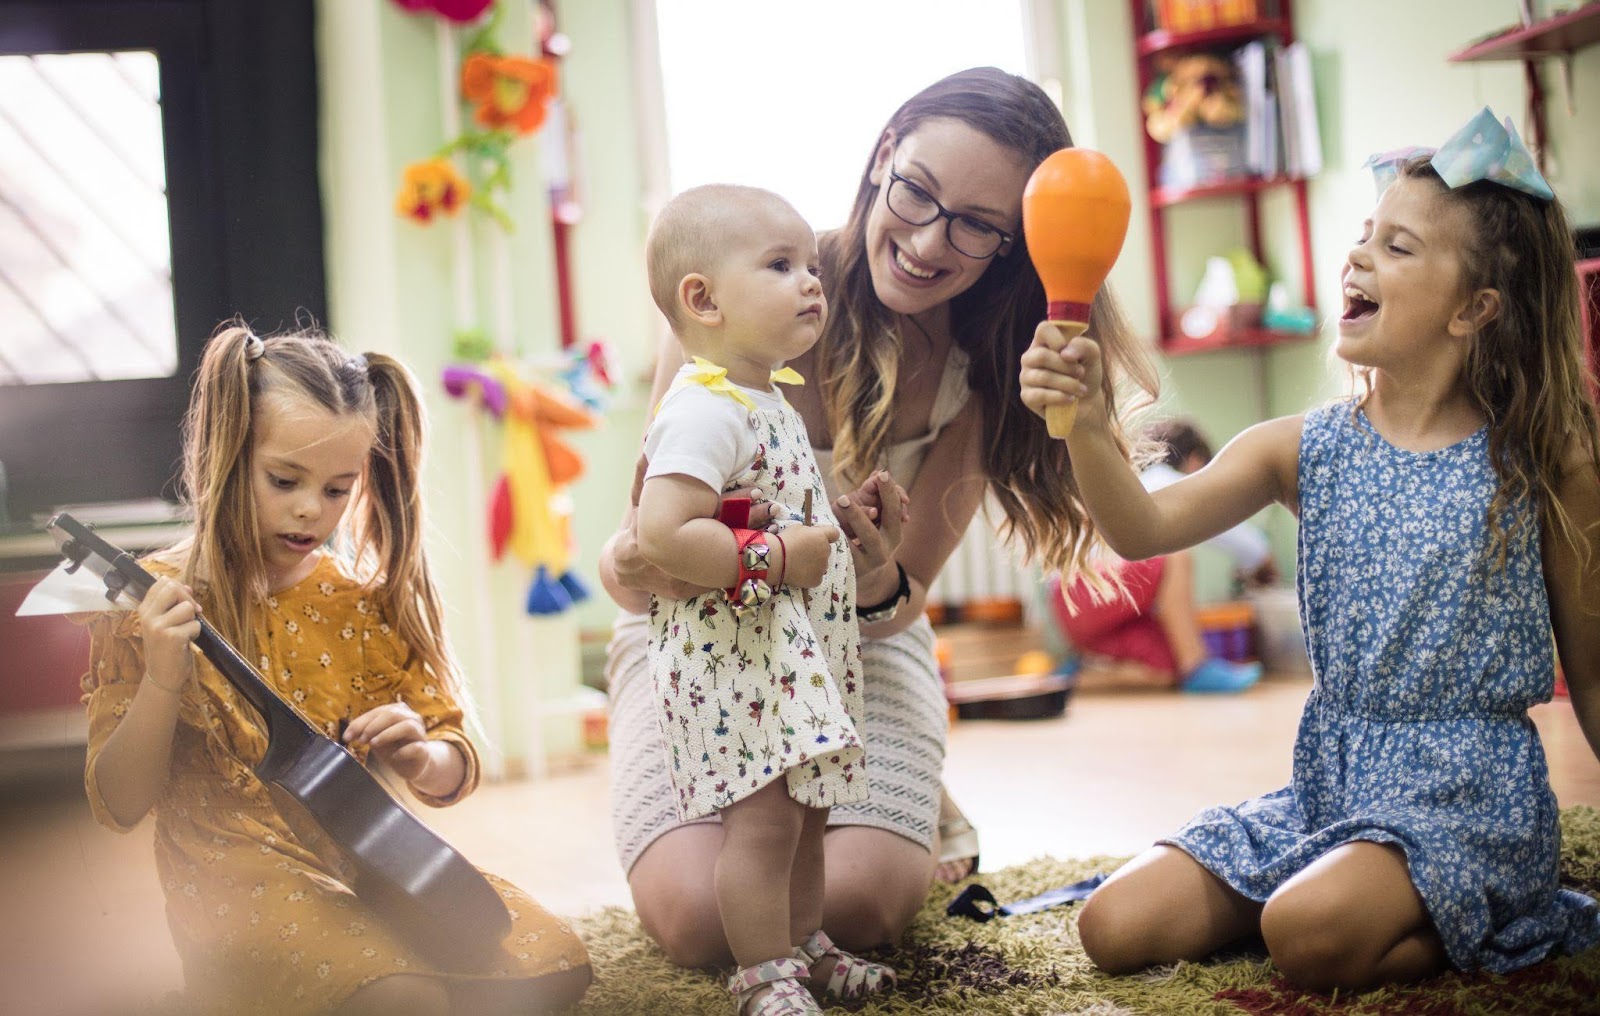 A woman and two children happily playing with toys on the floor.